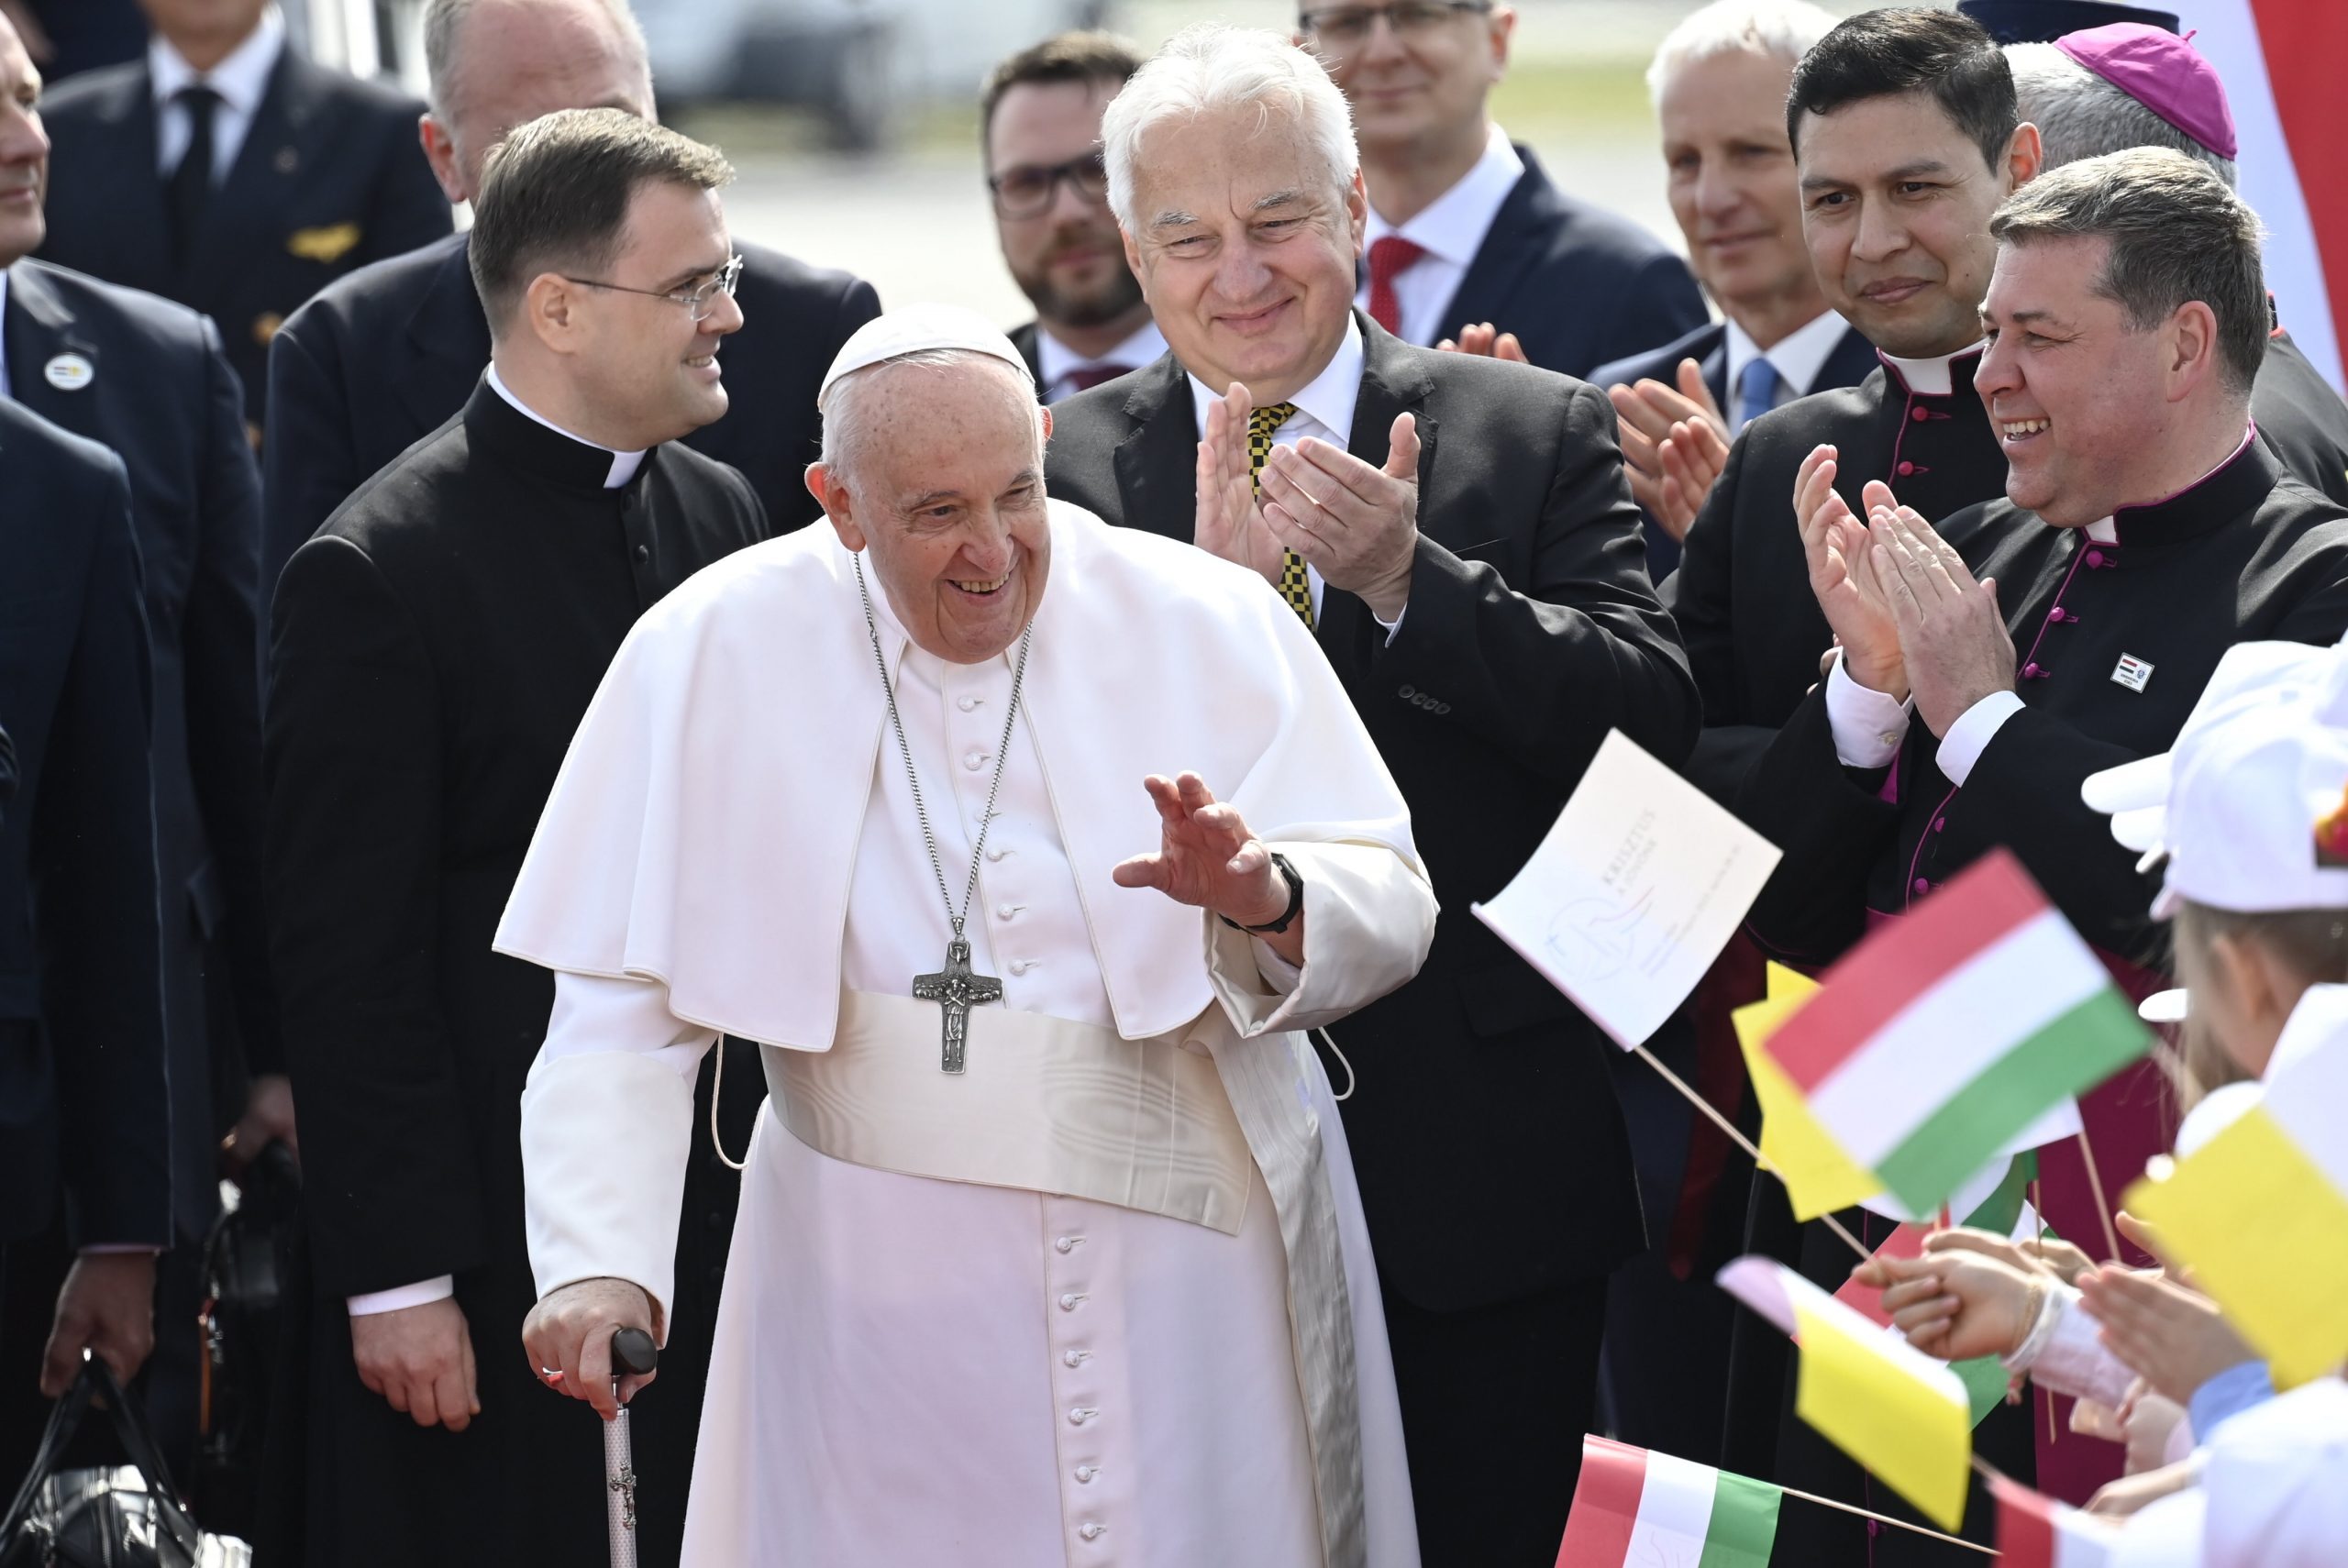 Habemus Papam! Pope Francis Lands in Hungary